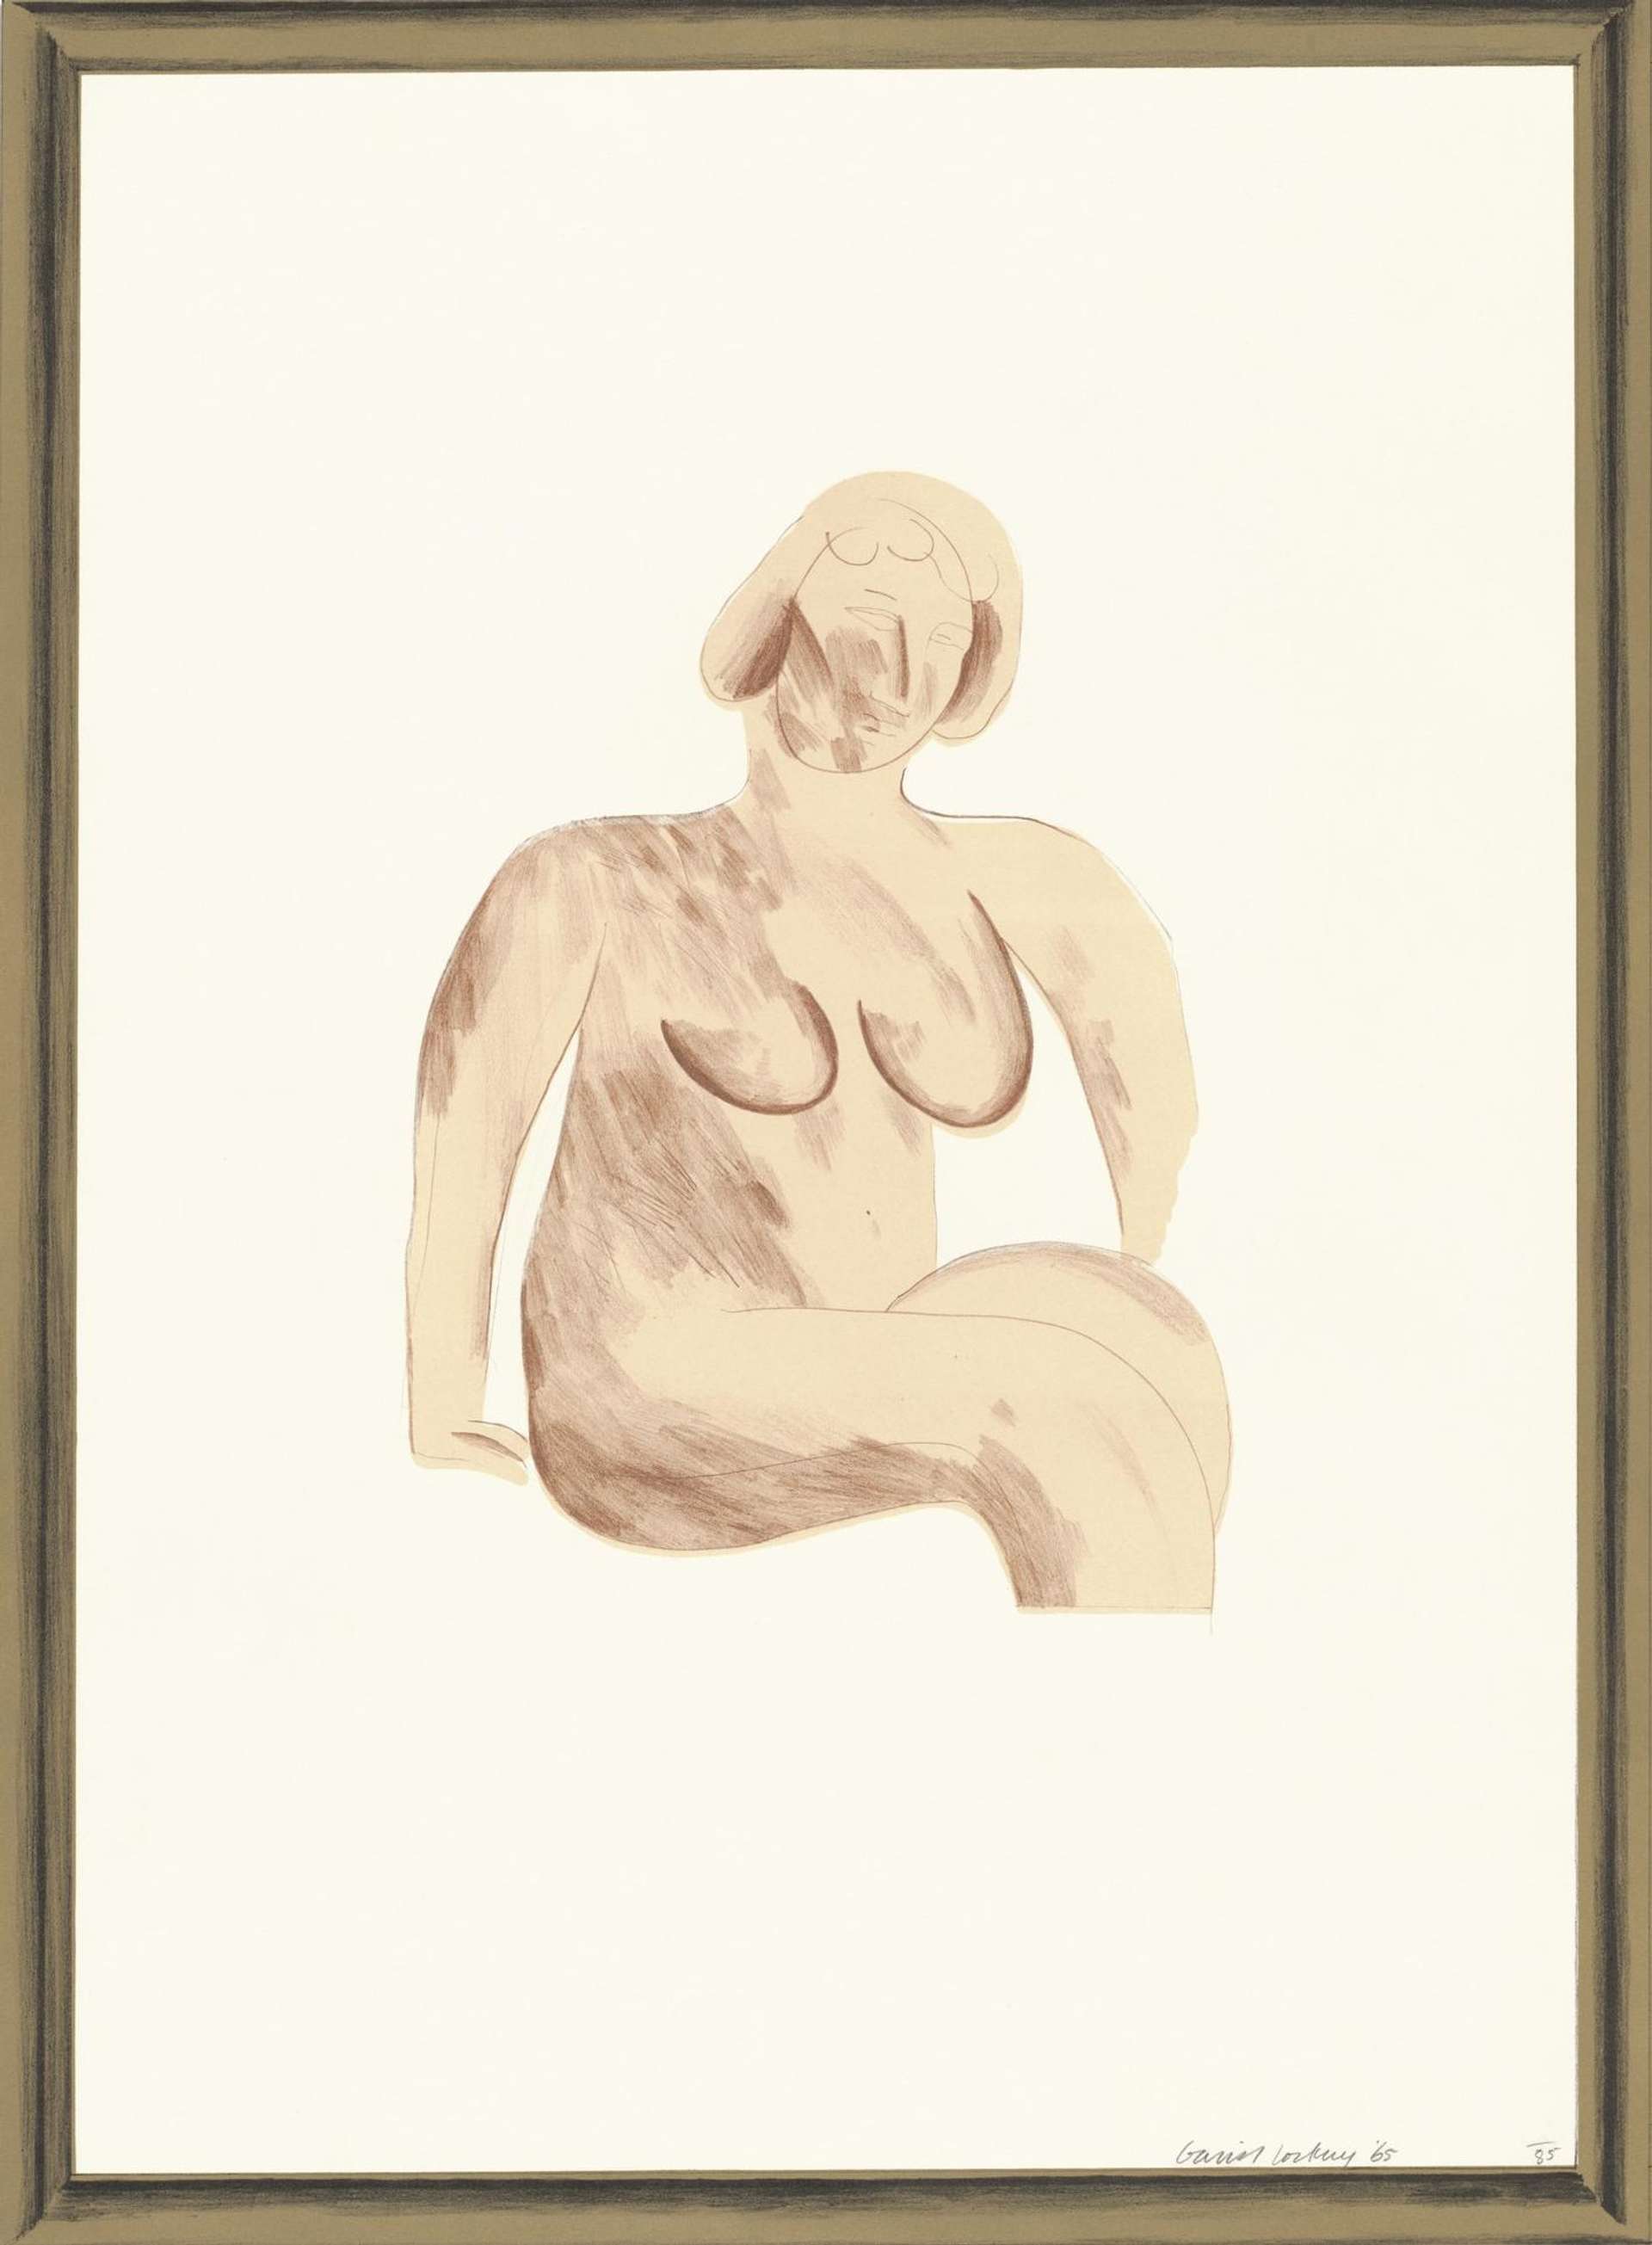 Picture of A Simple Framed Traditional Nude Drawing - Signed Print by David Hockney 1965 - MyArtBroker